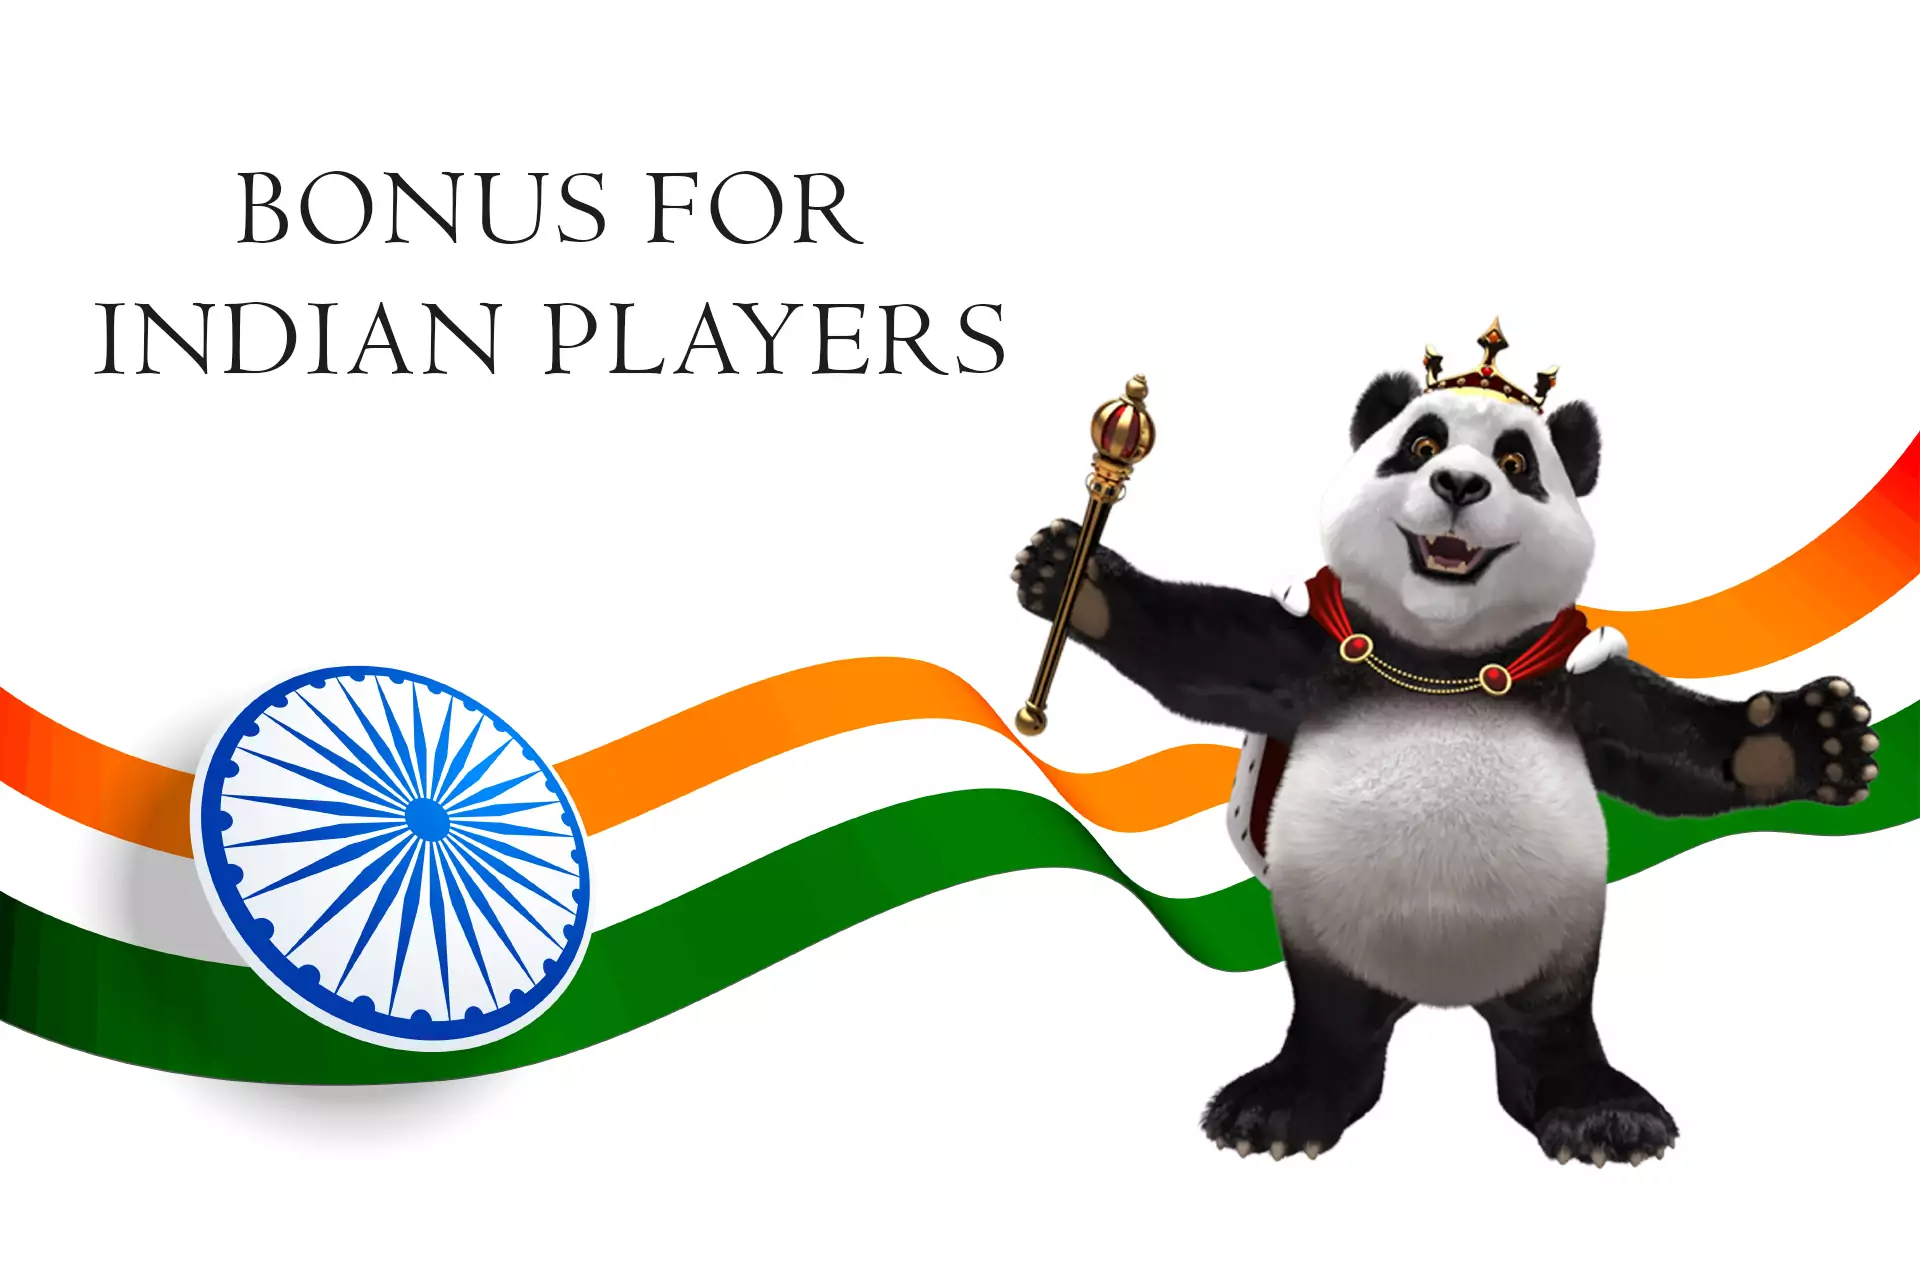 There is a special bonus for users from India.